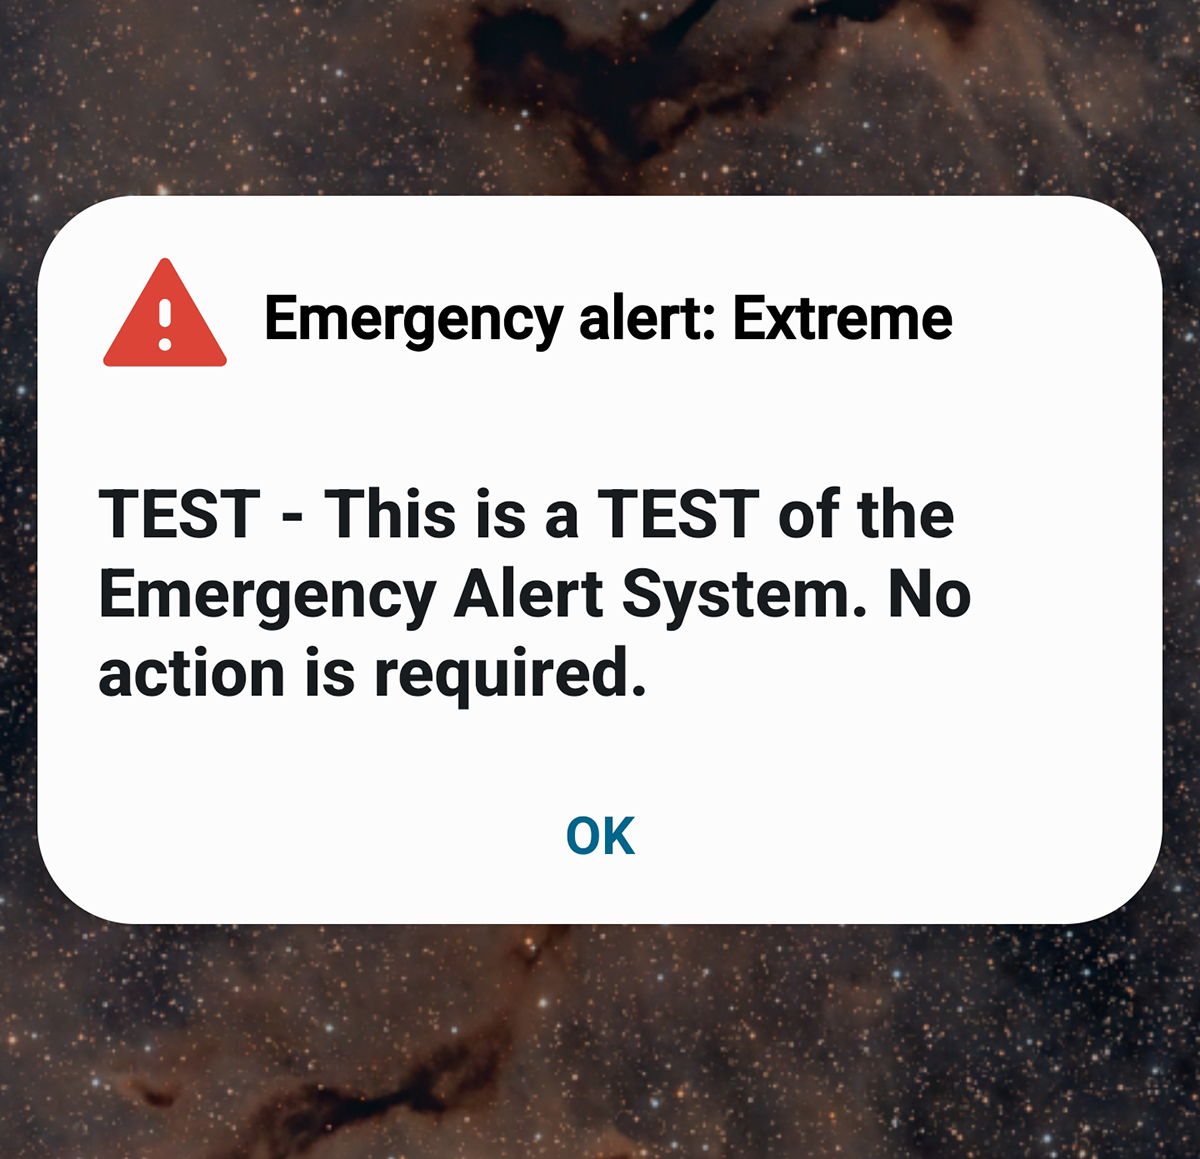 Florida Apologizes After 4:45 A.M. Emergency Alert Test - The New York Times